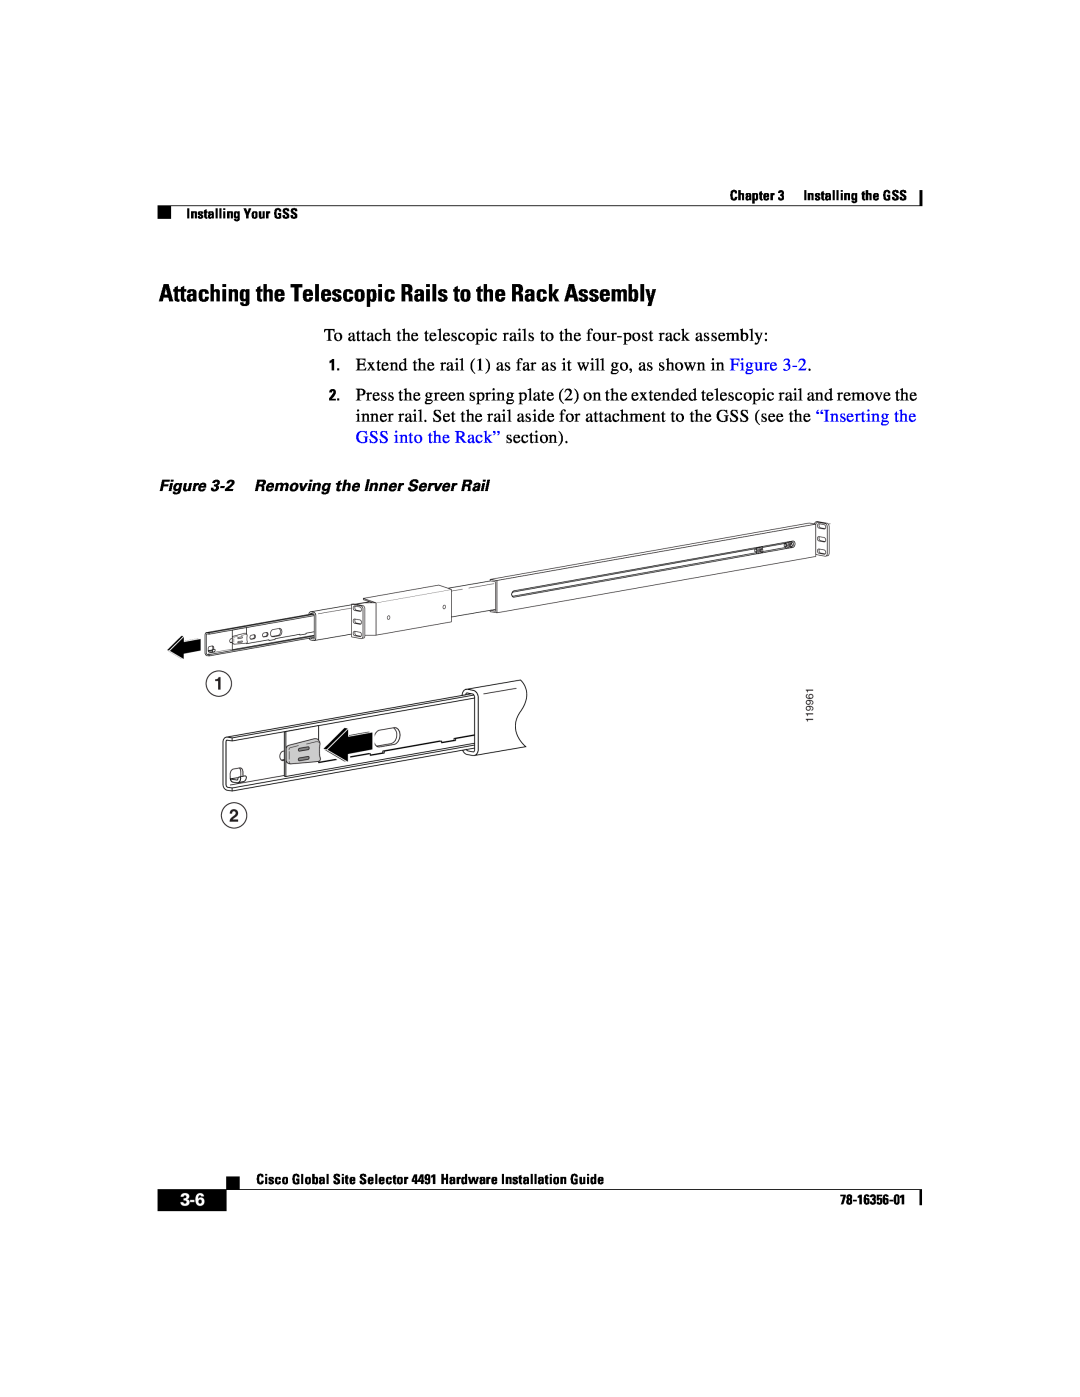 Cisco Systems 78-16356-01 manual Attaching the Telescopic Rails to the Rack Assembly 